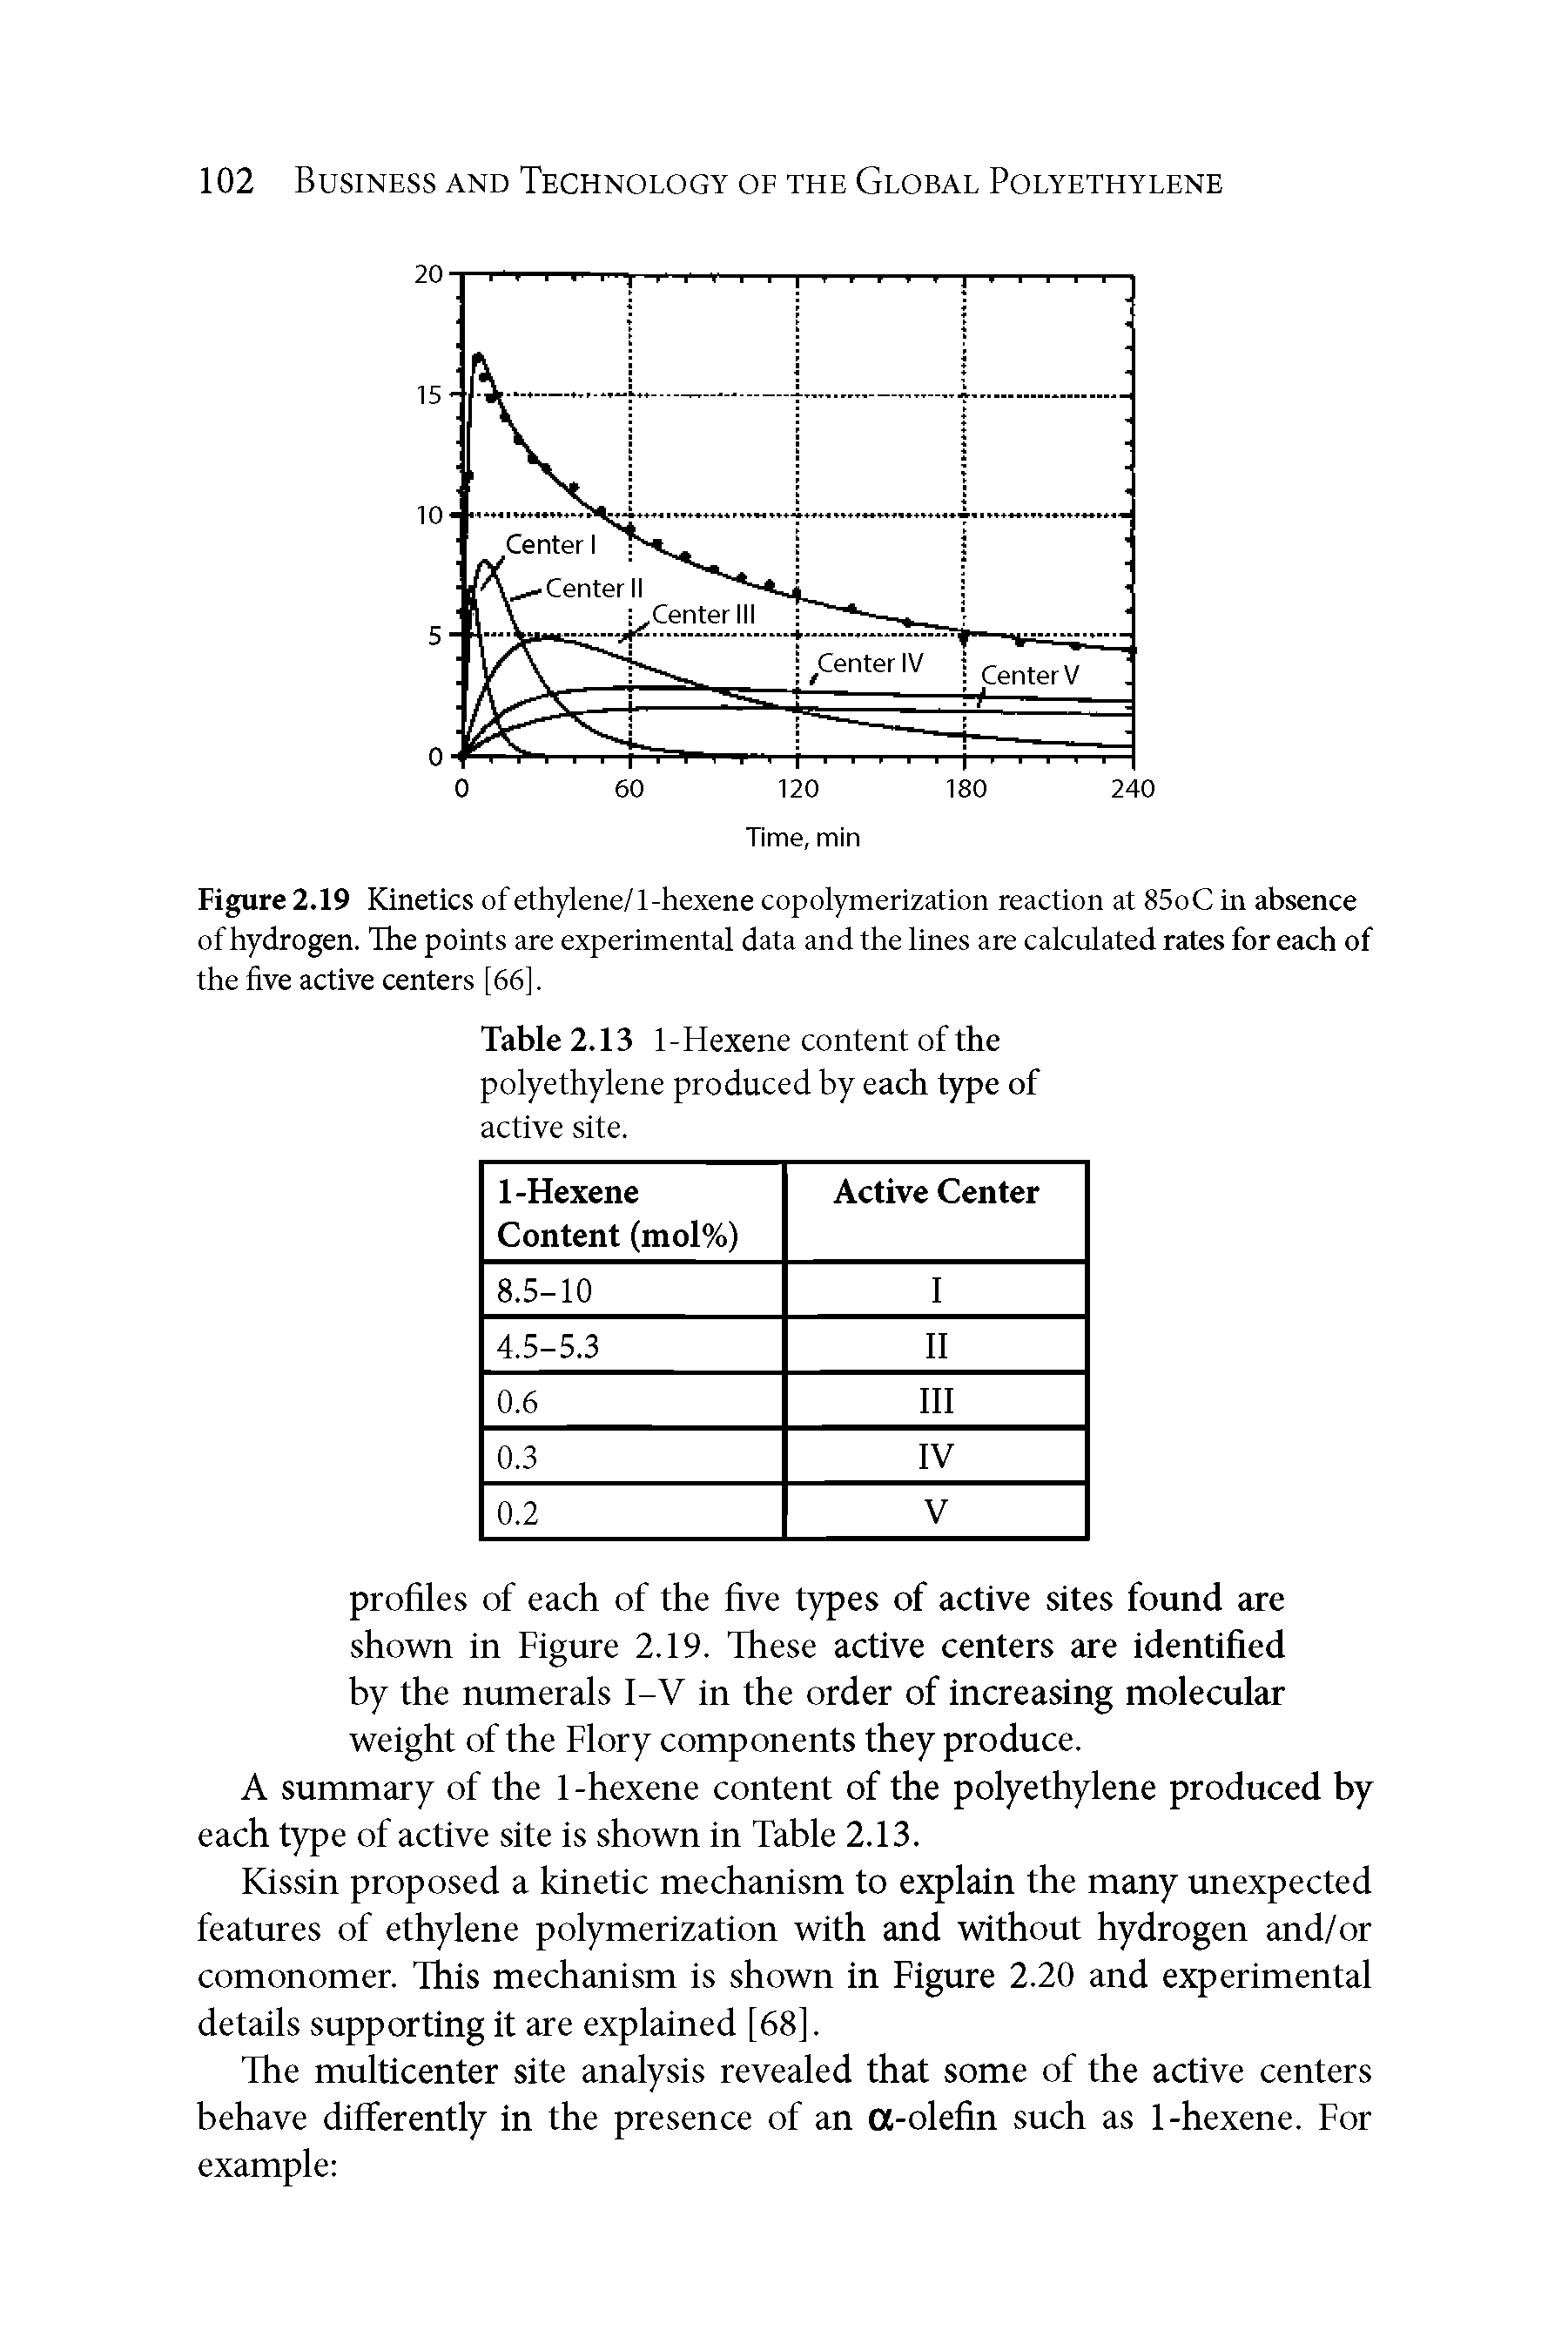 Figure 2.19 Kinetics of ethylene/1-hexene copolymerization reaction at 85oC in absence of hydrogen. The points are experimental data and the lines are calculated rates for each of the five active centers [66].